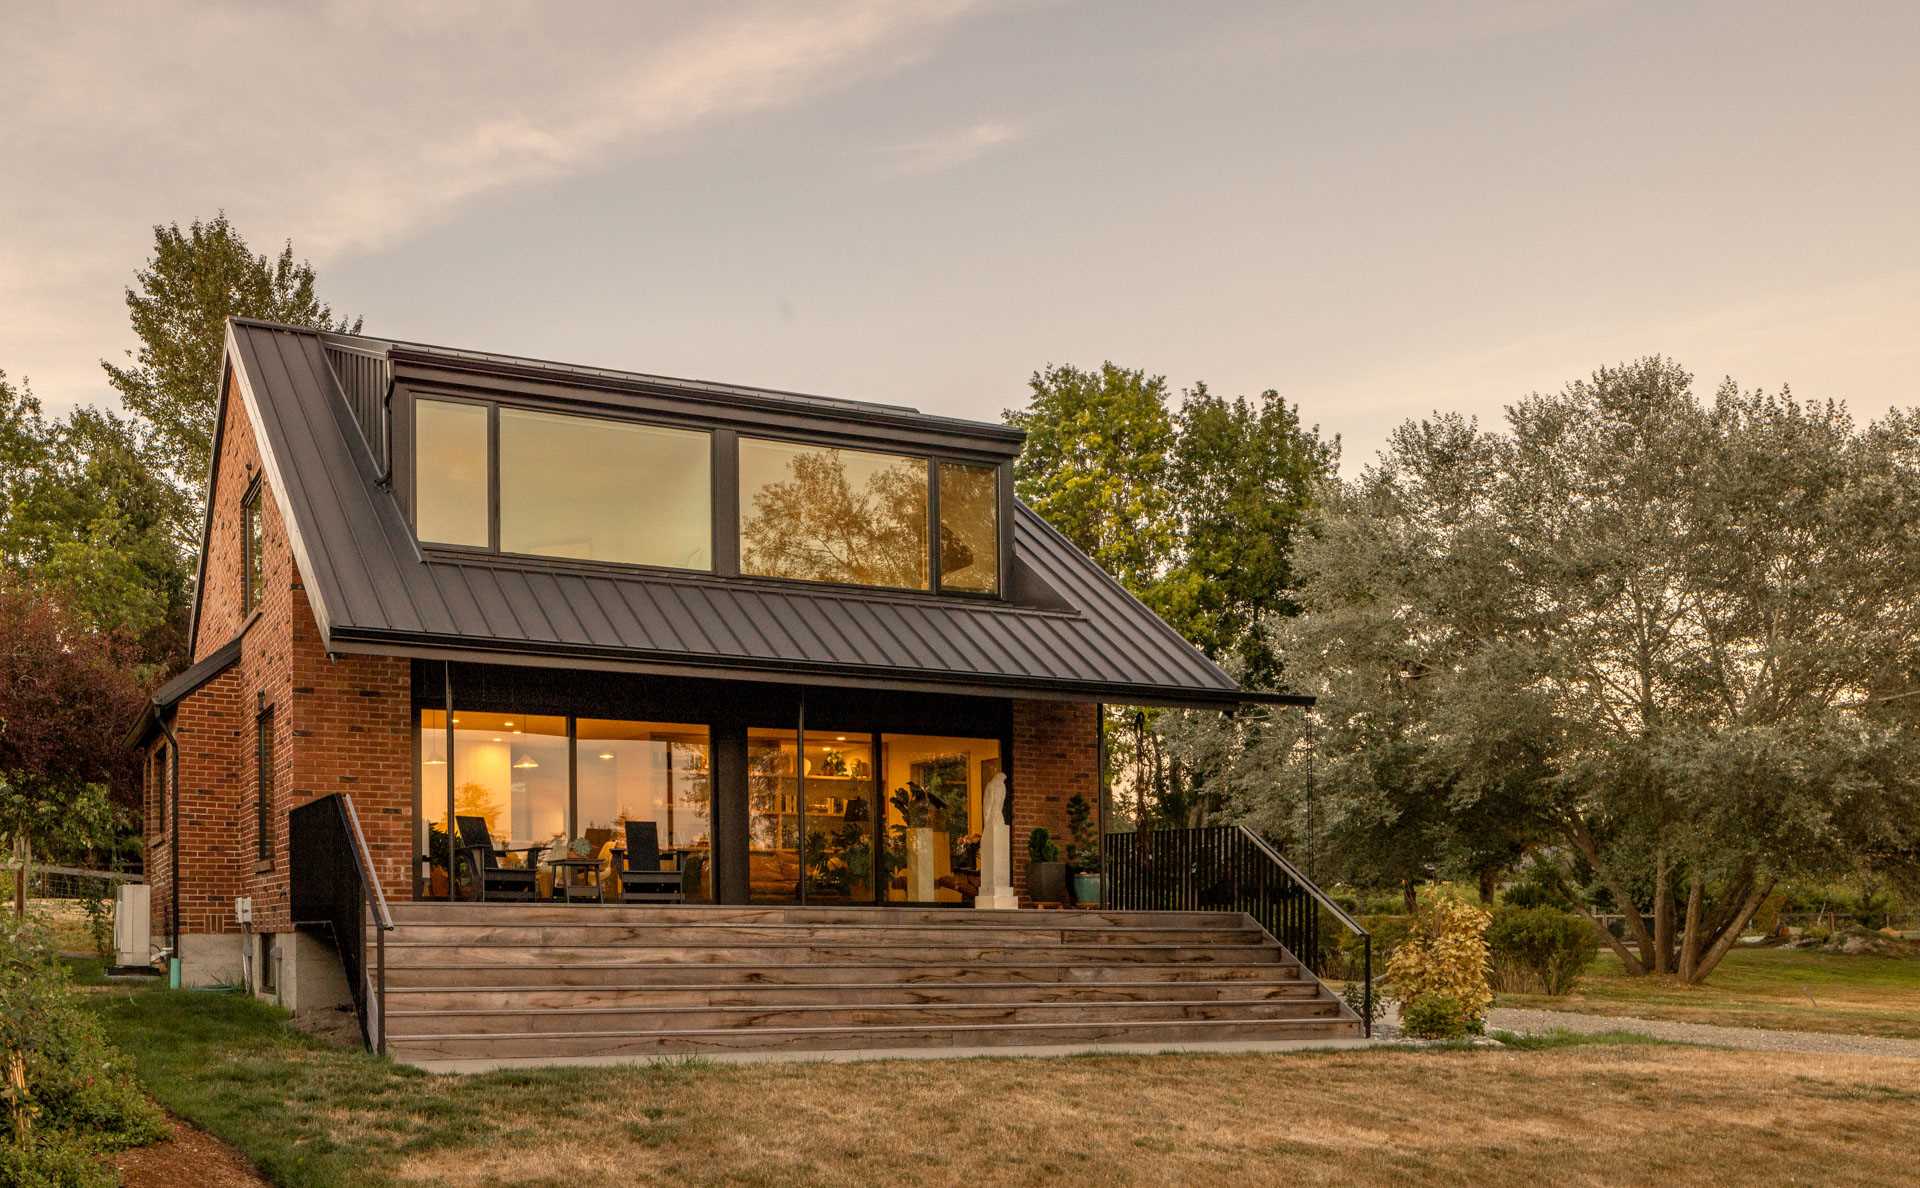 An updated brick home includes a sloping black metal roof, while the porch has been expanded to replace the small rear deck with a large outdoor space that spans both the new living room and dining room.